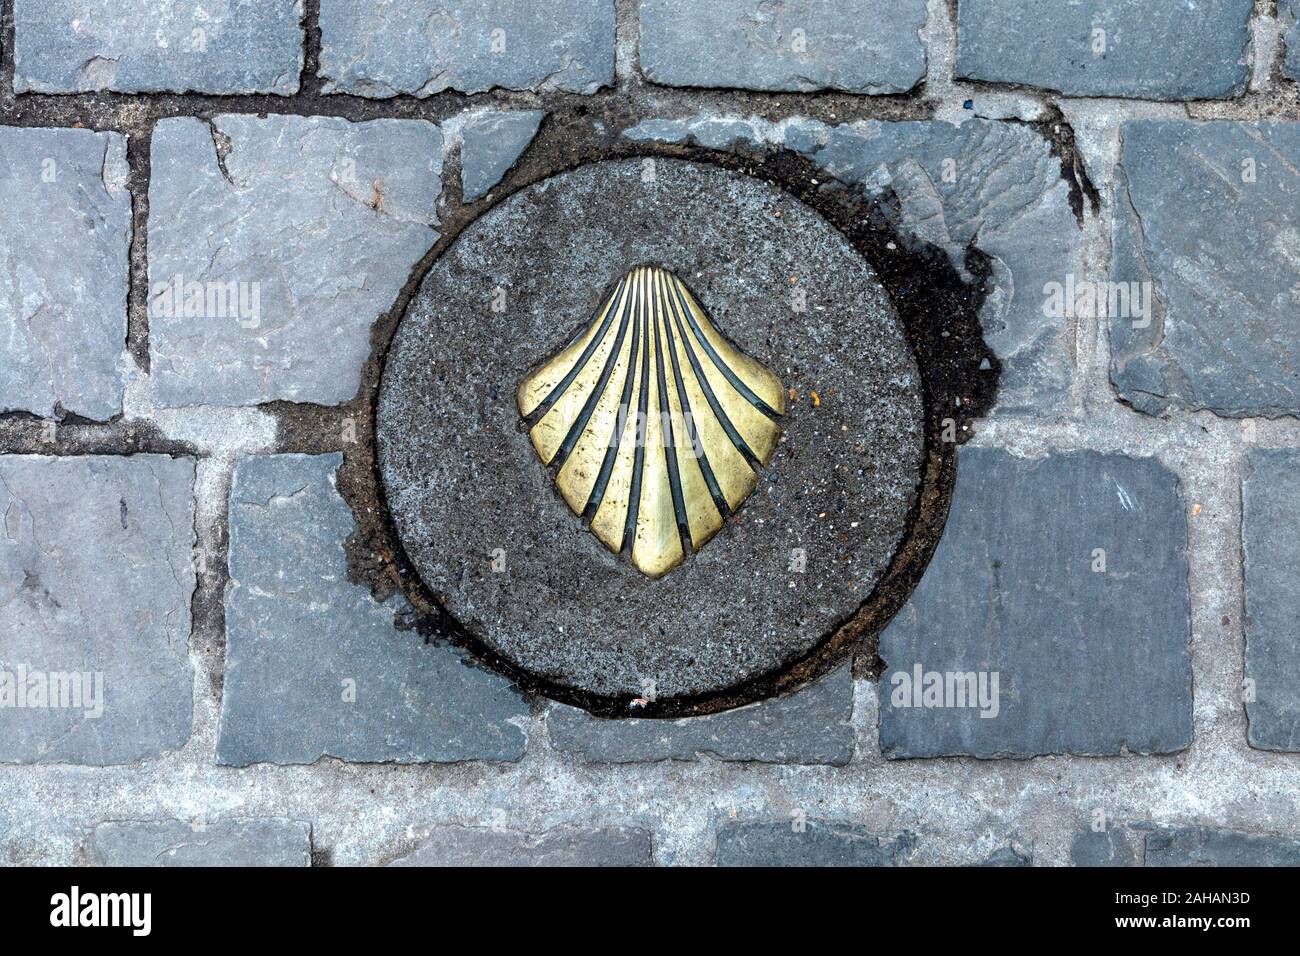 A brass shell set into the pavement, a marker for the Way of St. James pilgrimage walk to Santiago de Compostela, Antwerp, Belgium Stock Photo